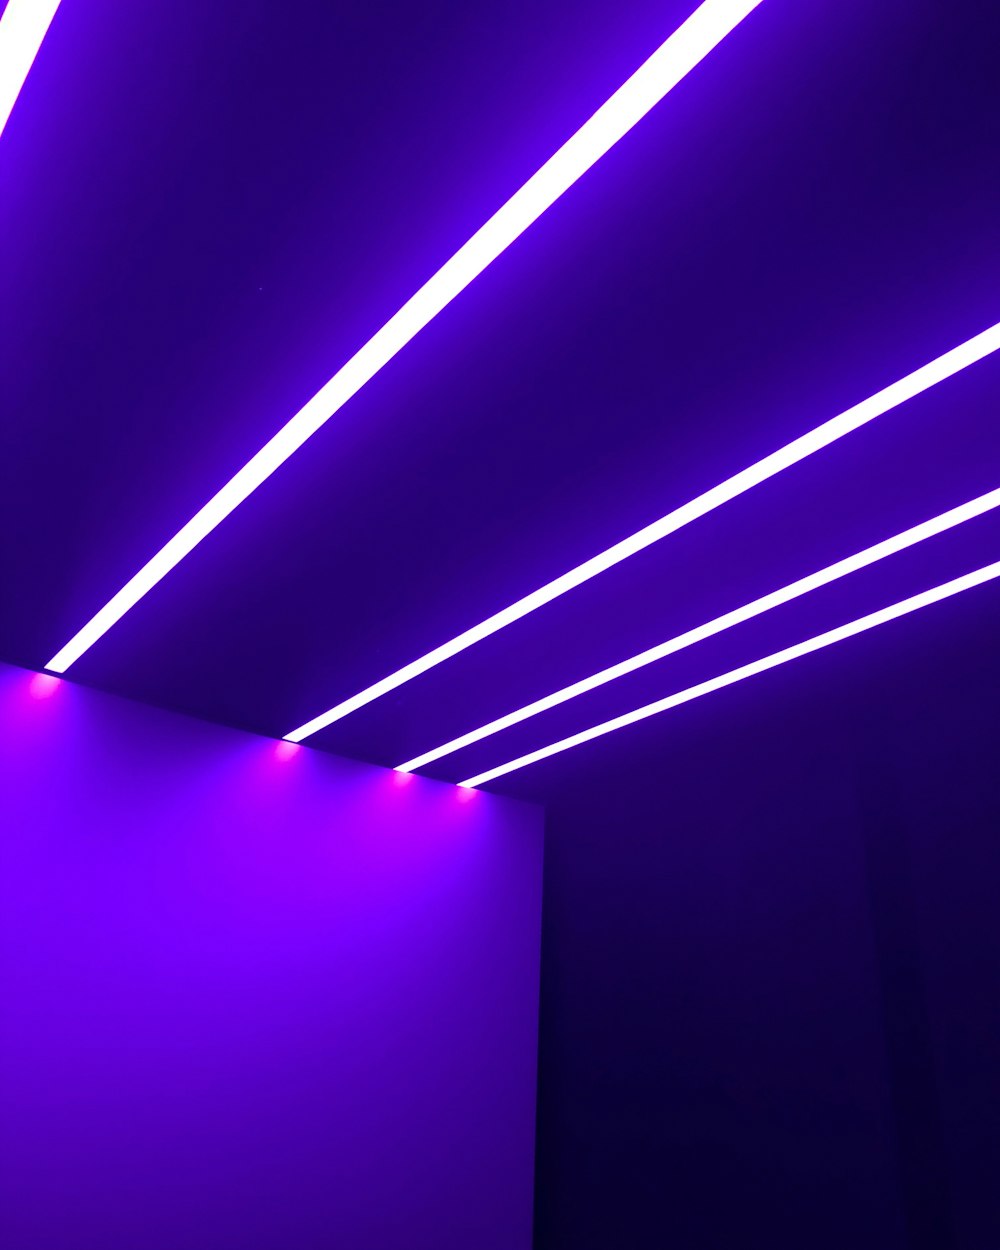 Purple Neon Pictures  Download Free Images on Unsplash